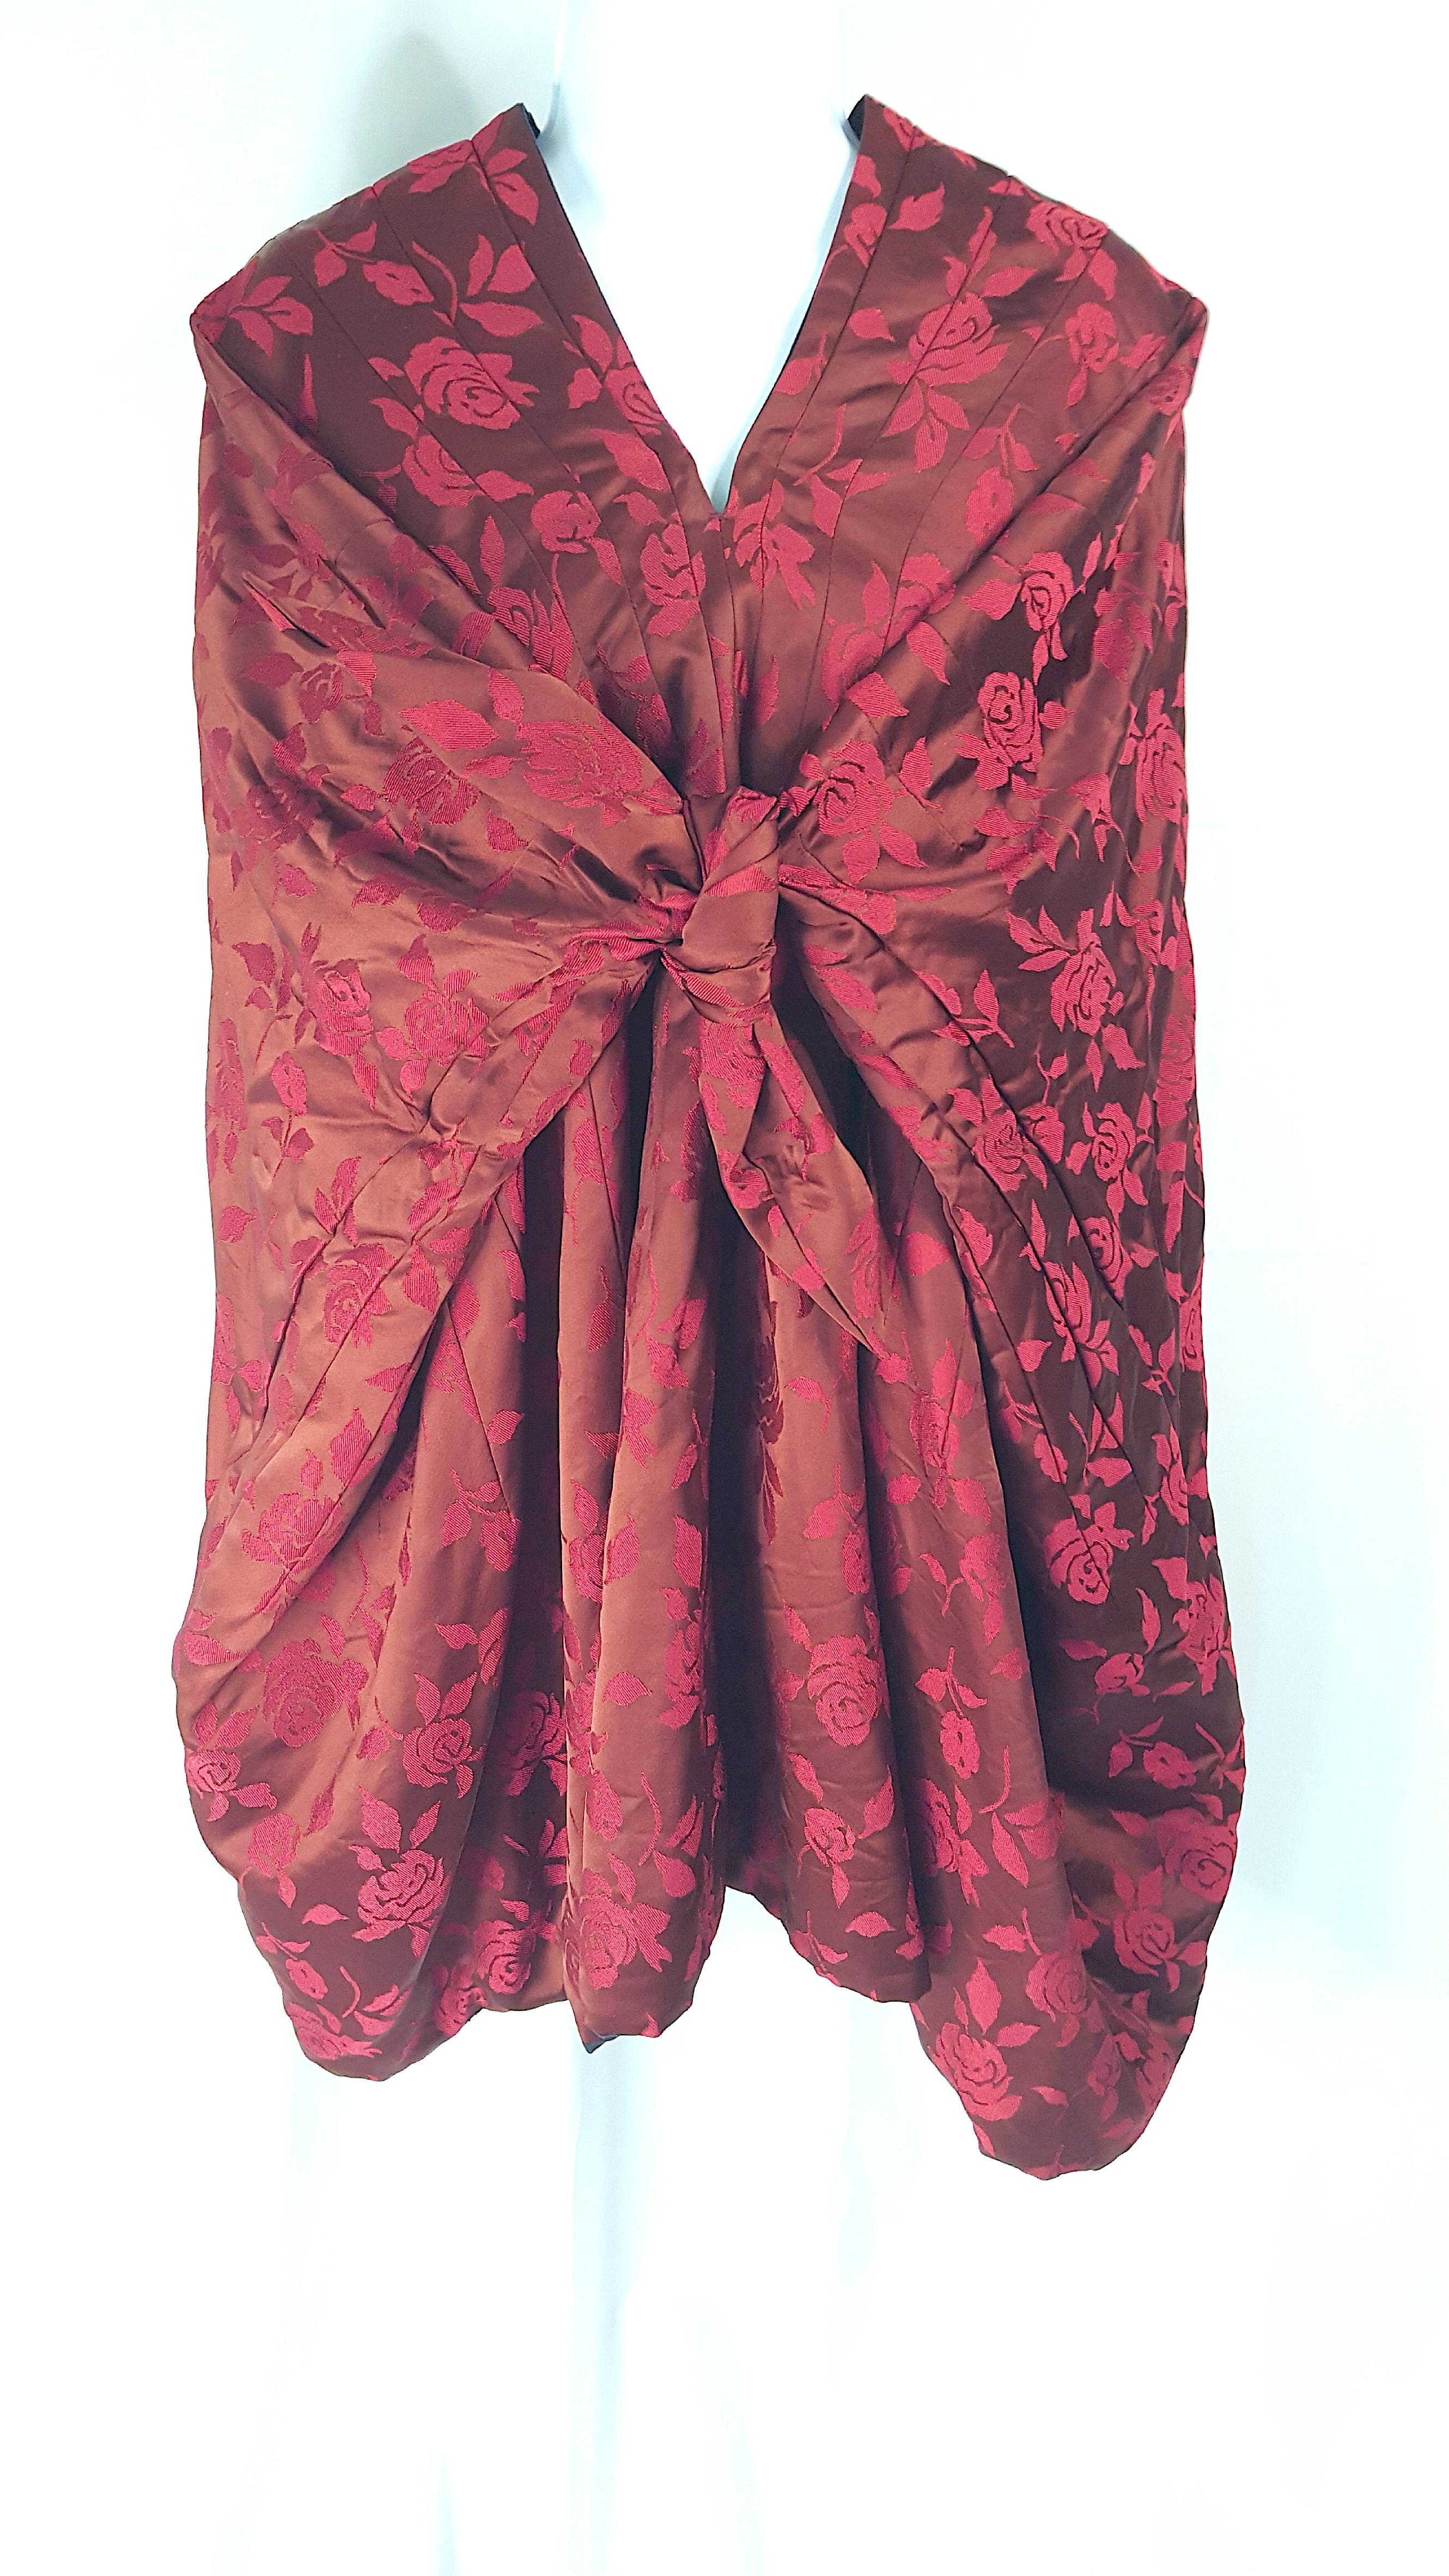 CommeDesGarcons 1996 Convertible Padded RedRoseJacquard & NavyCotton Skirt Cape In Excellent Condition For Sale In Chicago, IL